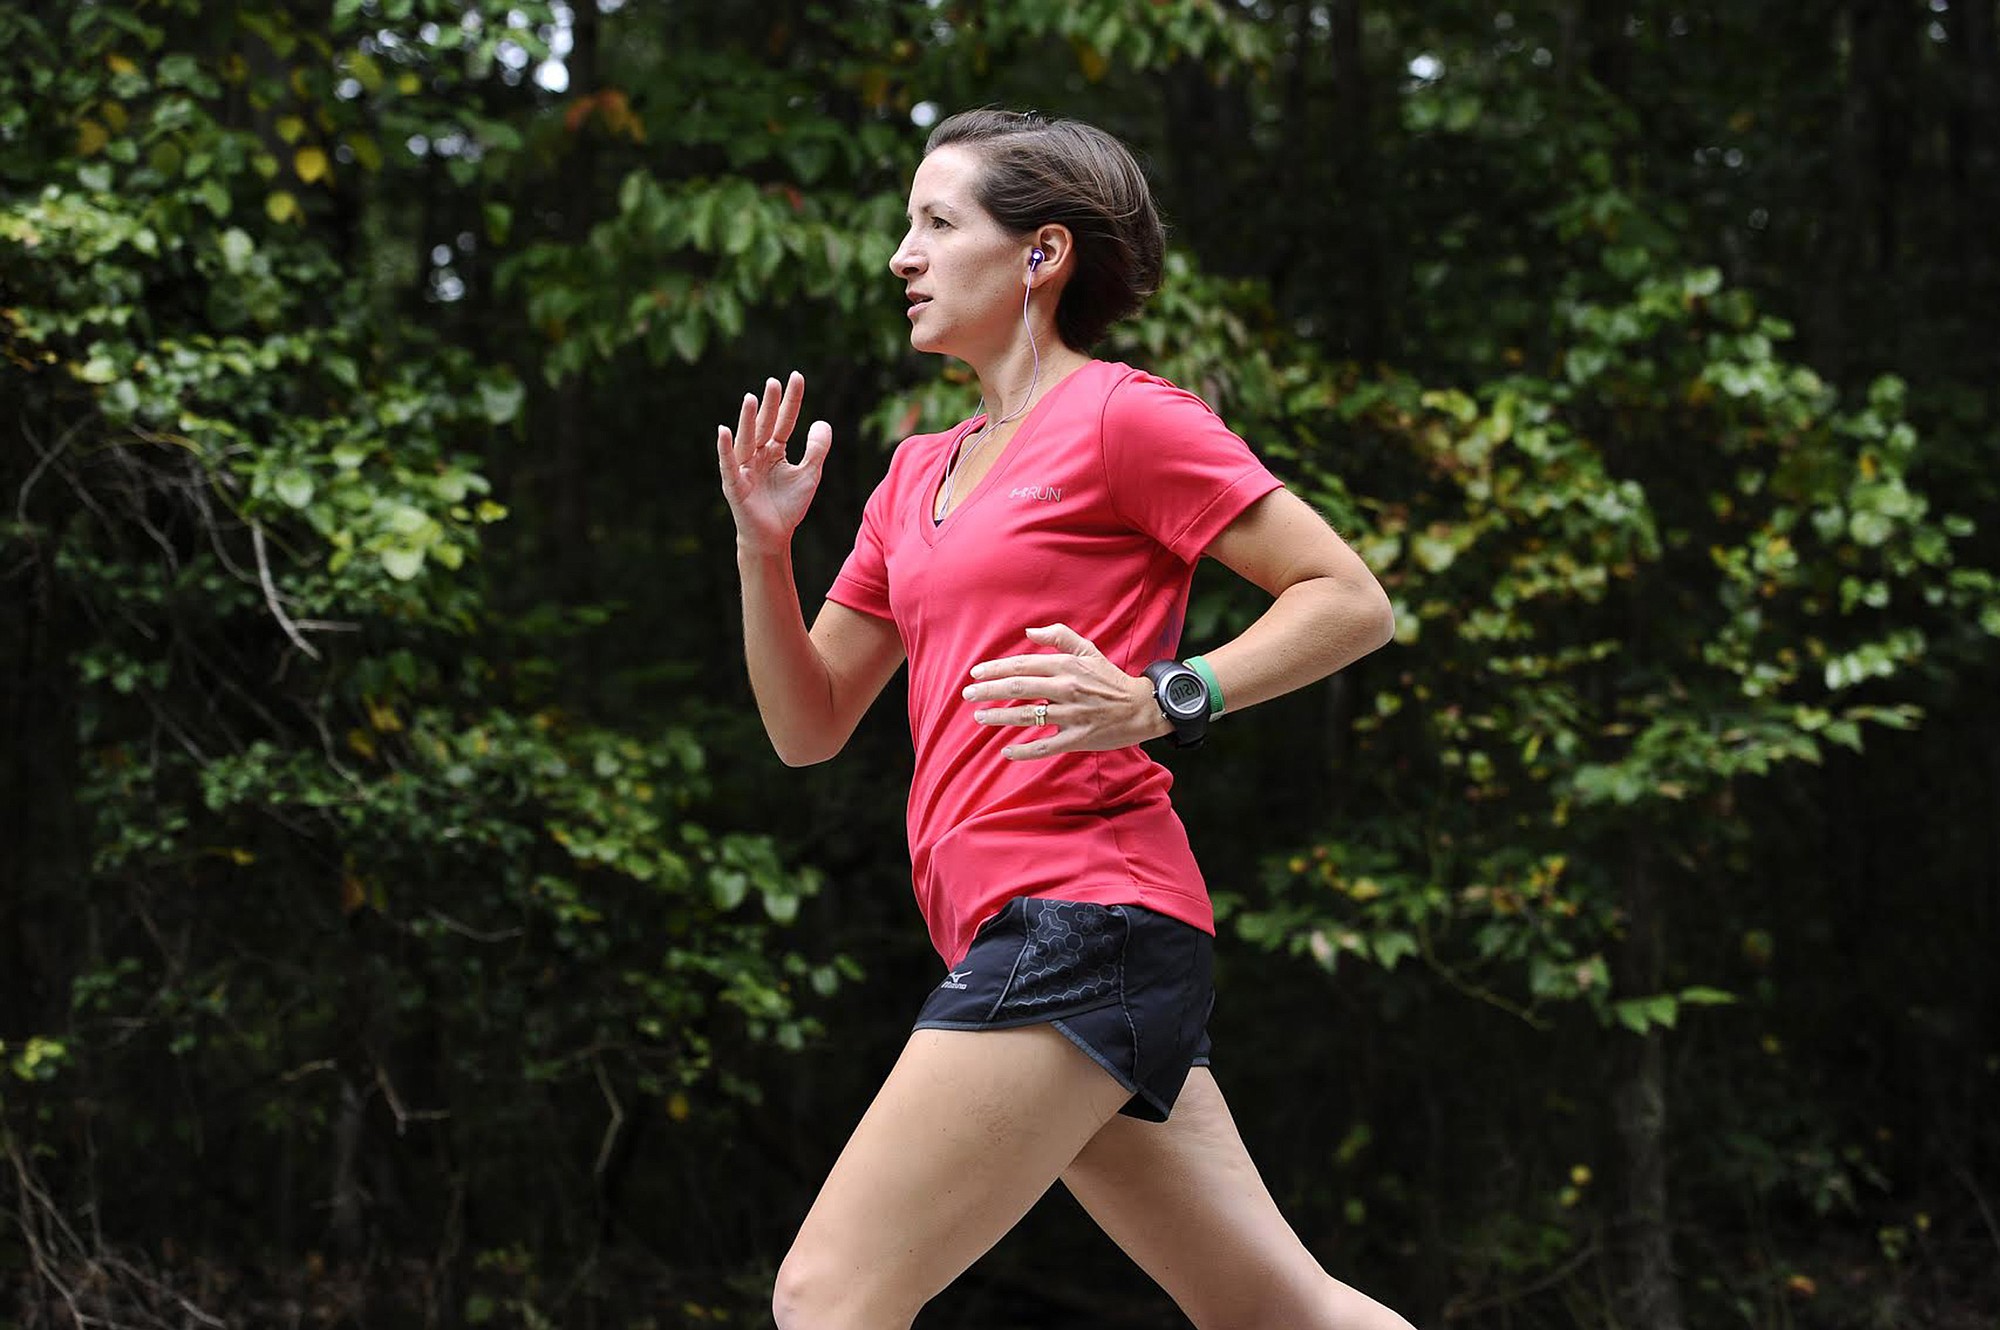 Beth Stewart, 38, started running after she was diagnosed with breast cancer in June 2012.